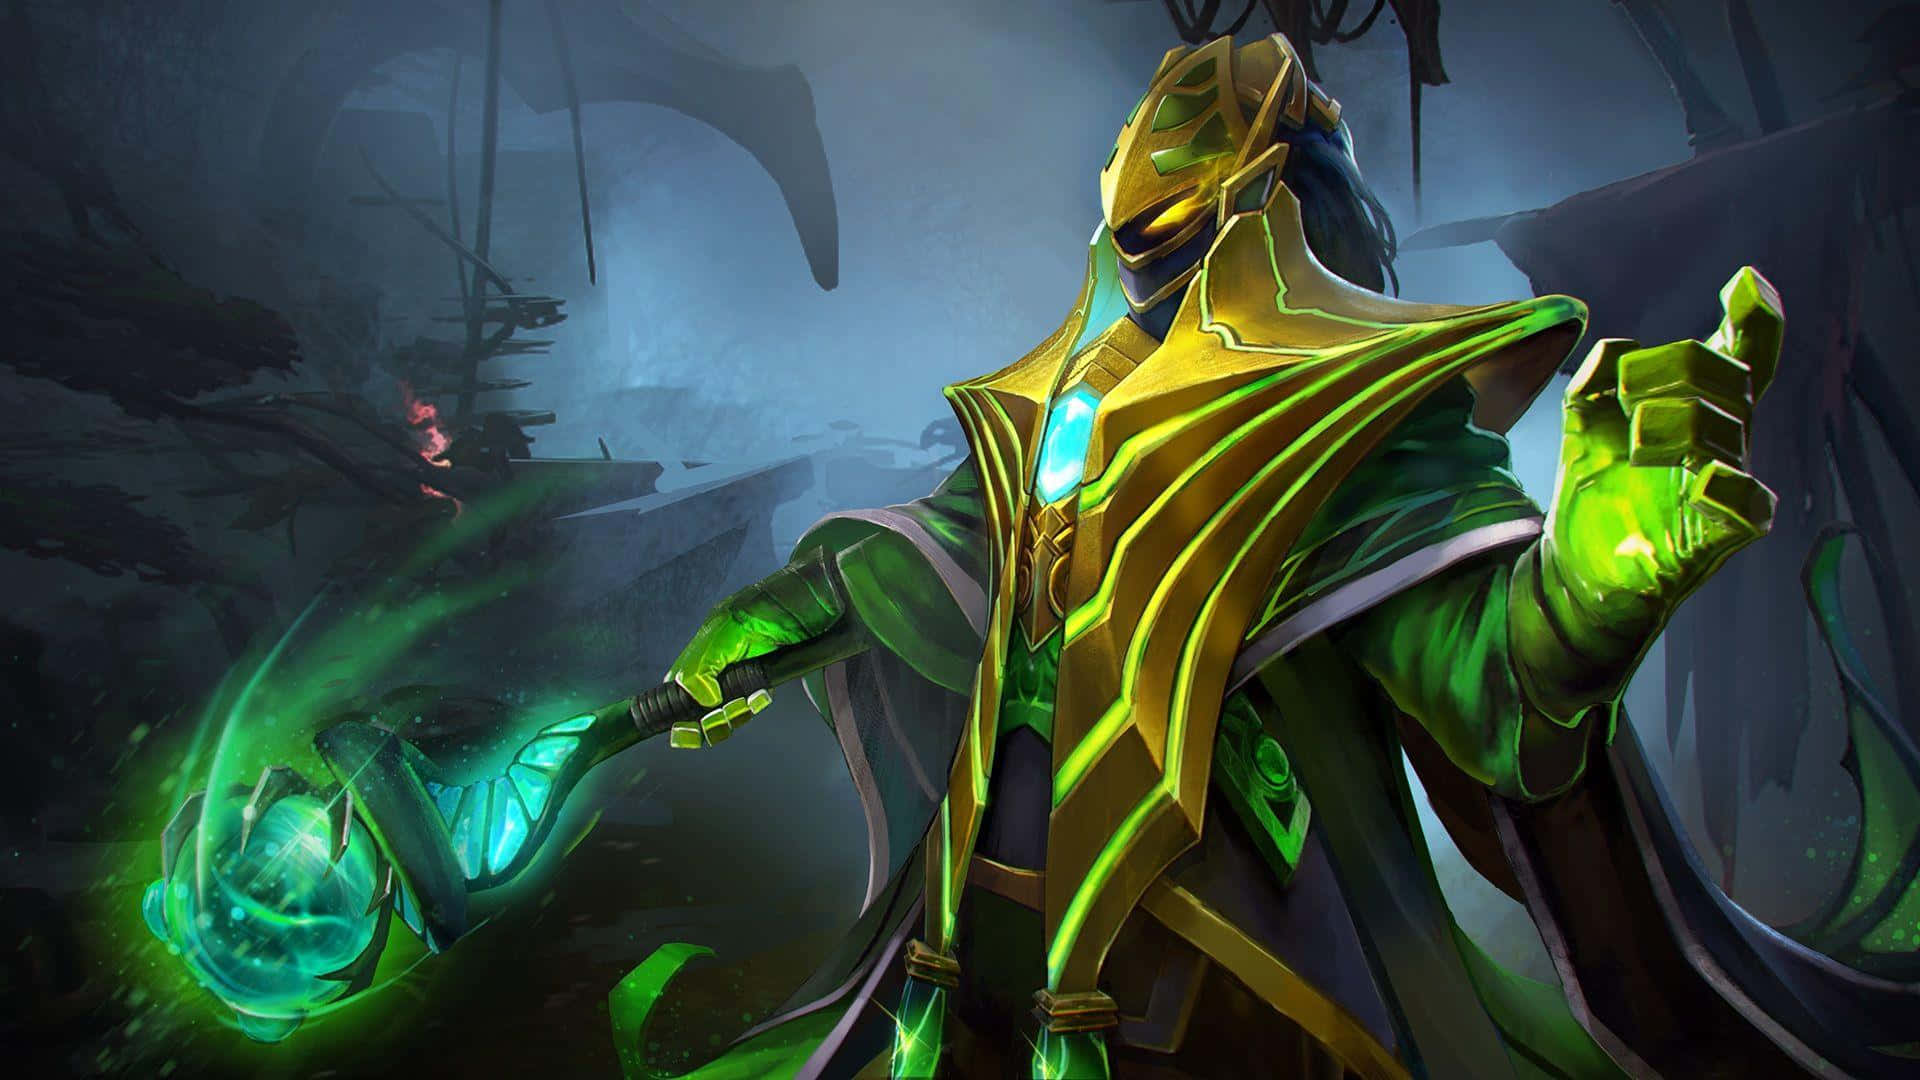 The powerful Magus Rubick mastering his arcane abilities in an impressive pose. Wallpaper